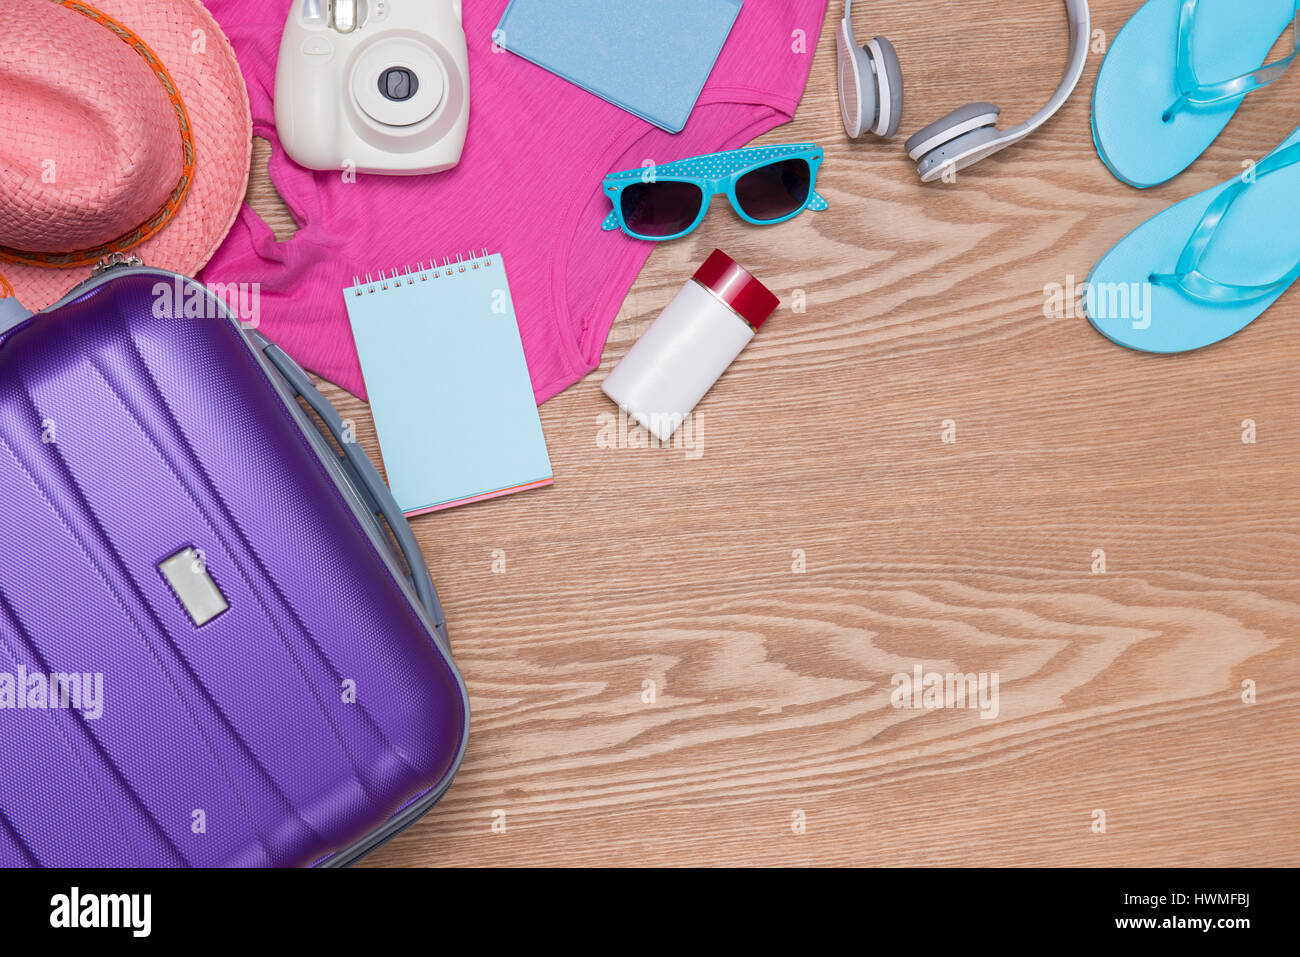 Vacations concept. holiday suitcase. Ready for travel. Stock Photo